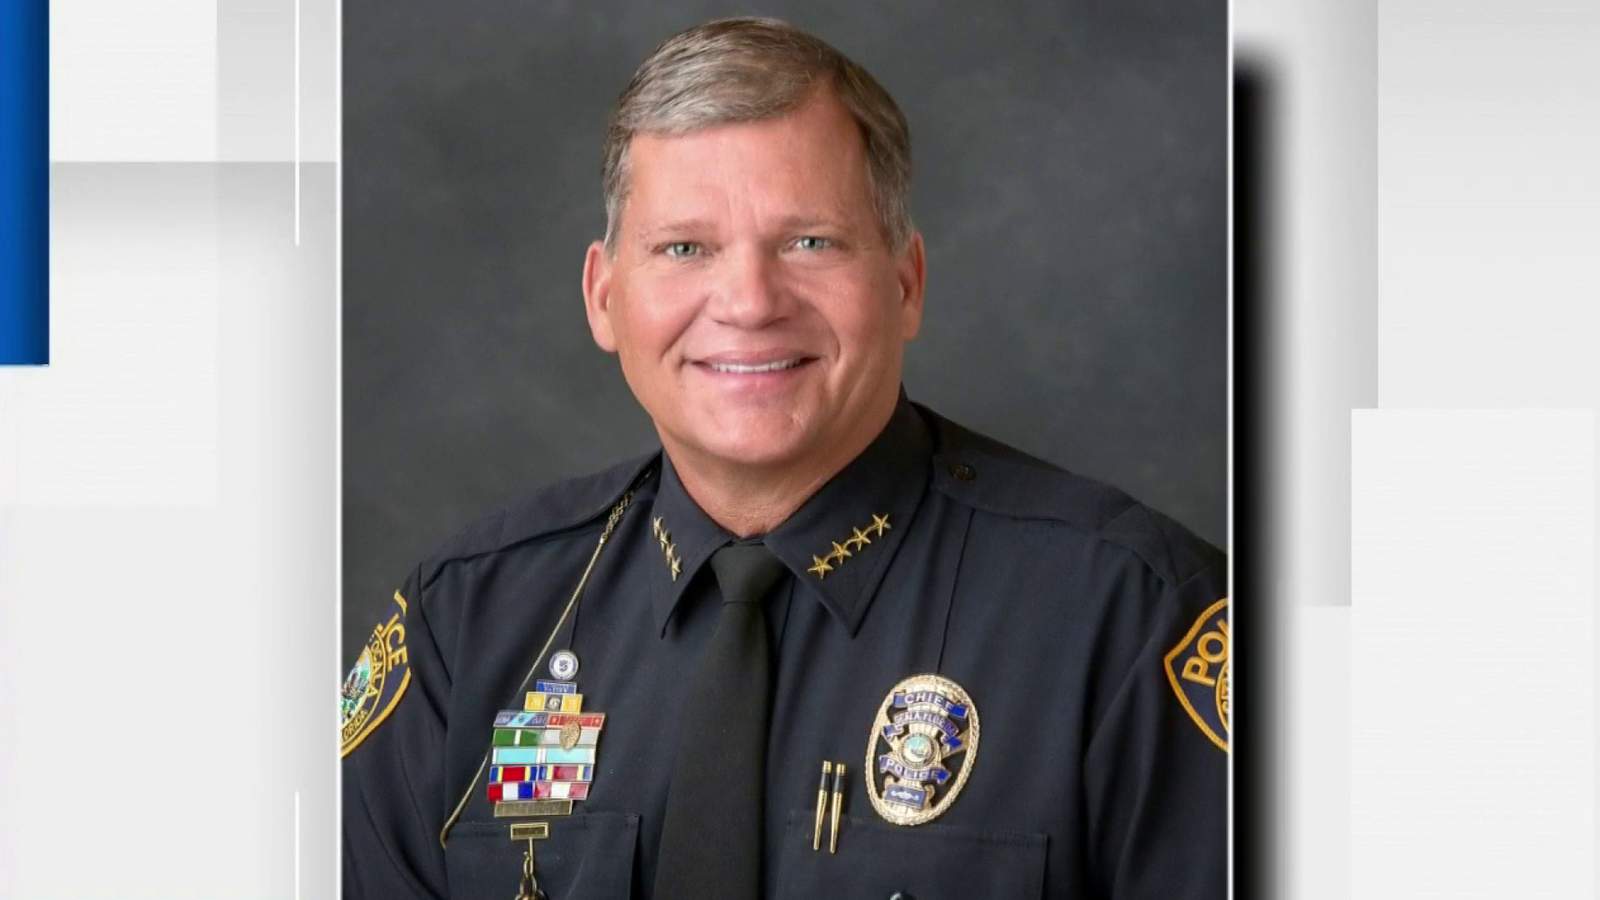 Funeral held for Ocala police chief killed in plane crash